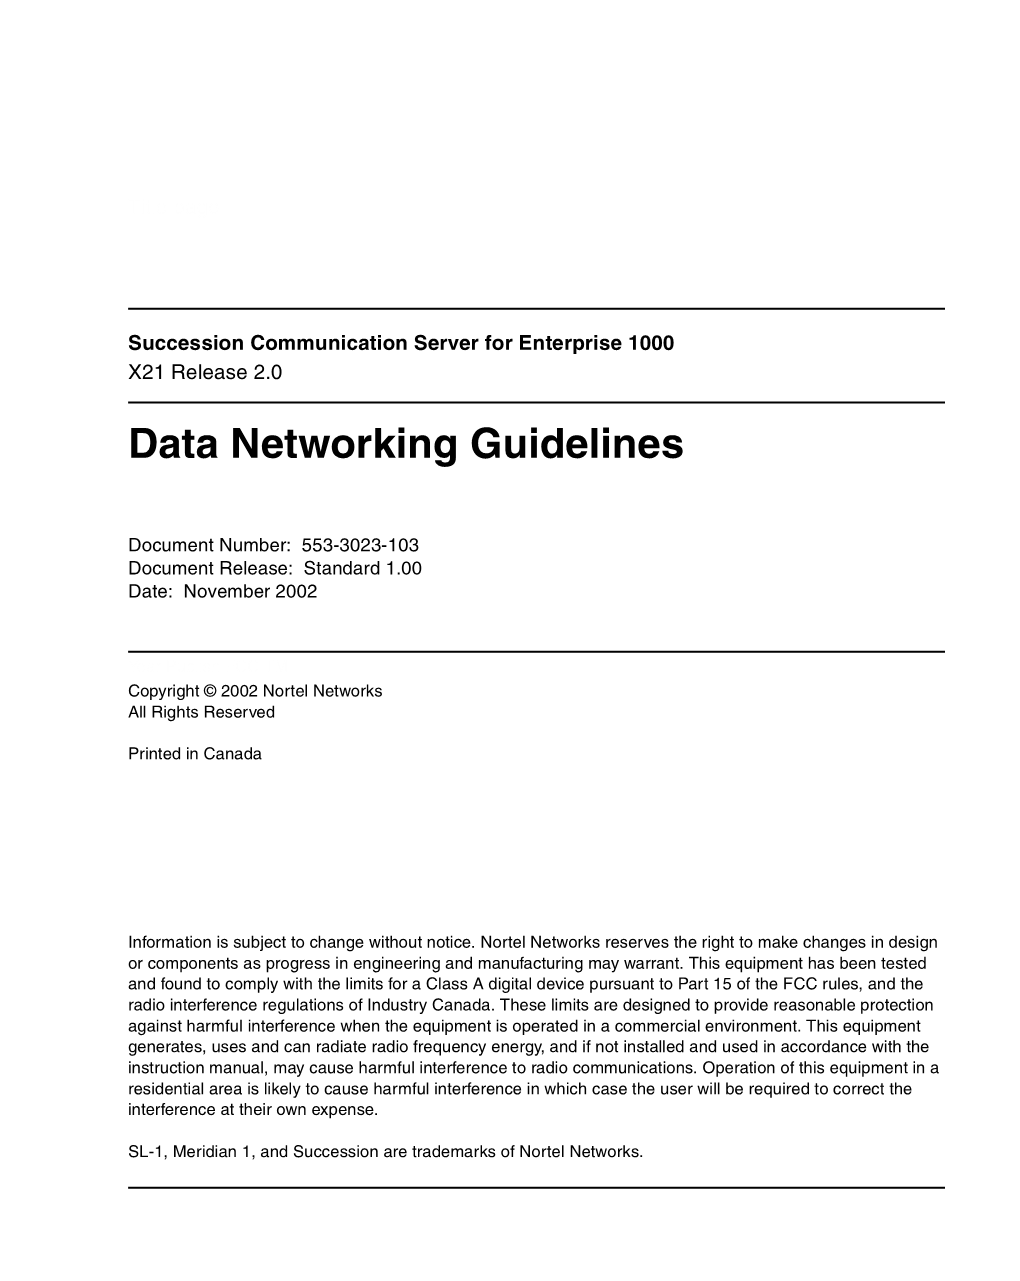 Data Networking Guidelines